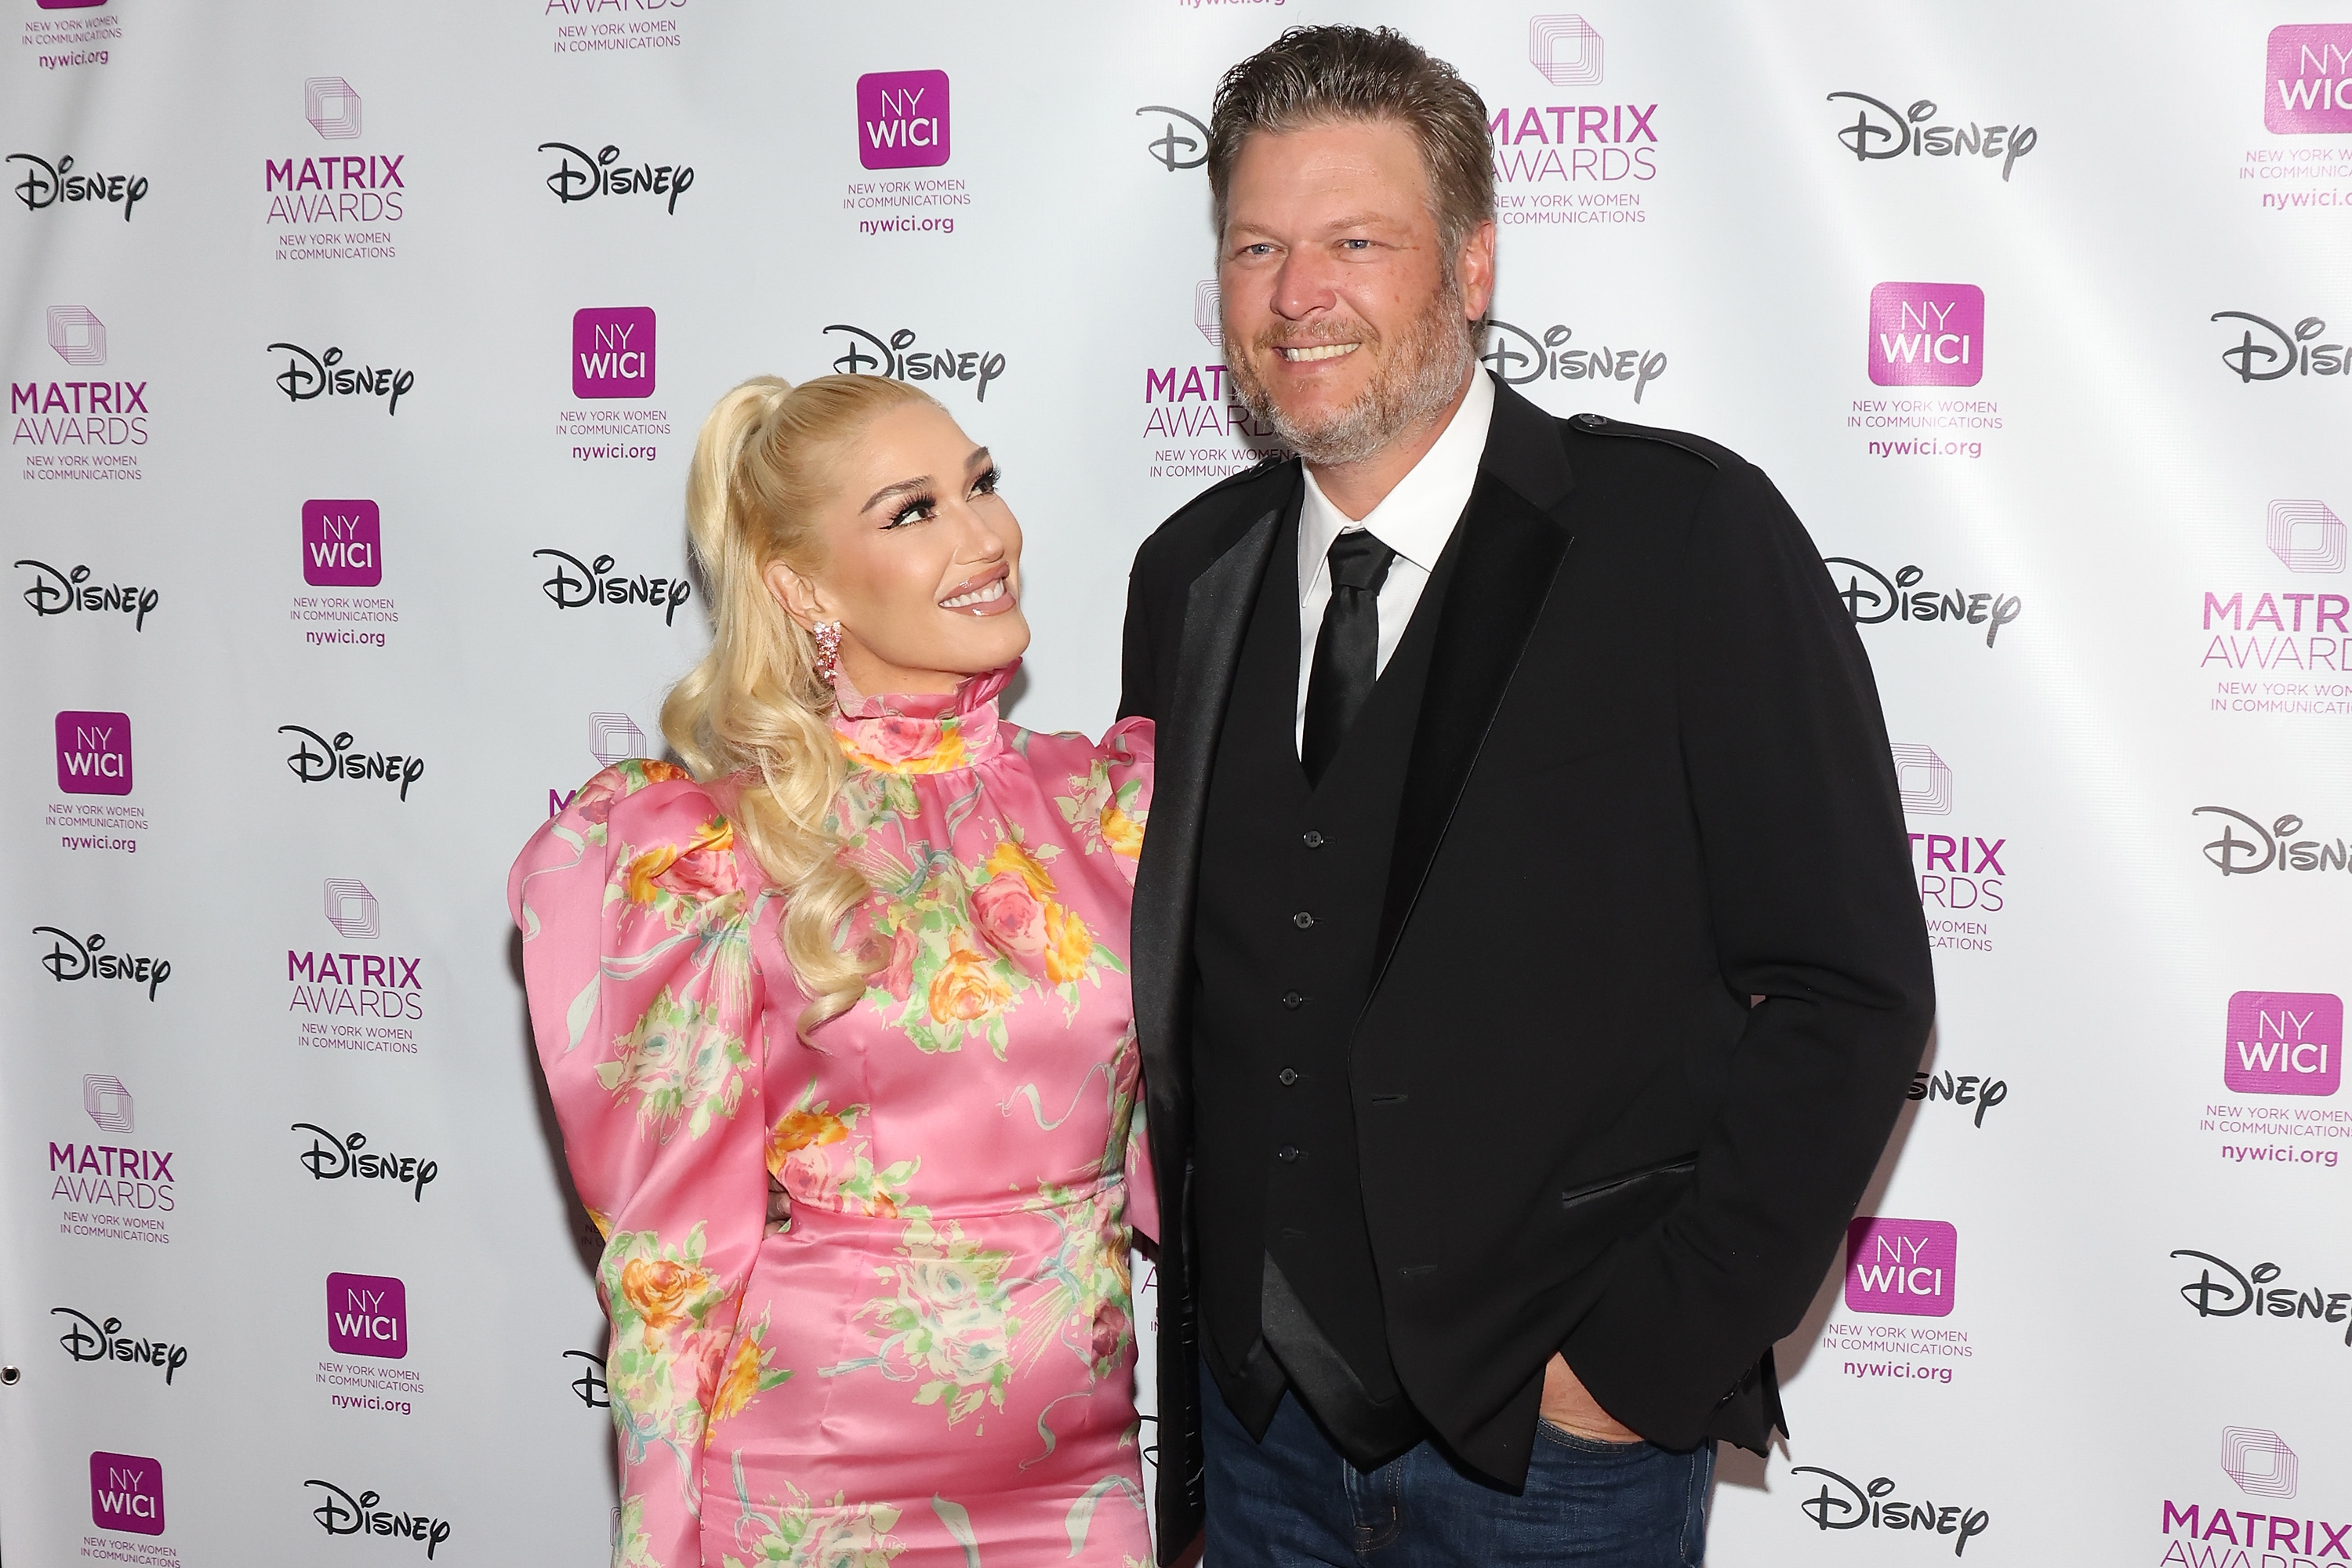 Gwen Stefani and Blake Shelton attend the Matrix Awards at The Ziegfeld Ballroom in New York City on October 26, 2022. | Source: Getty Images